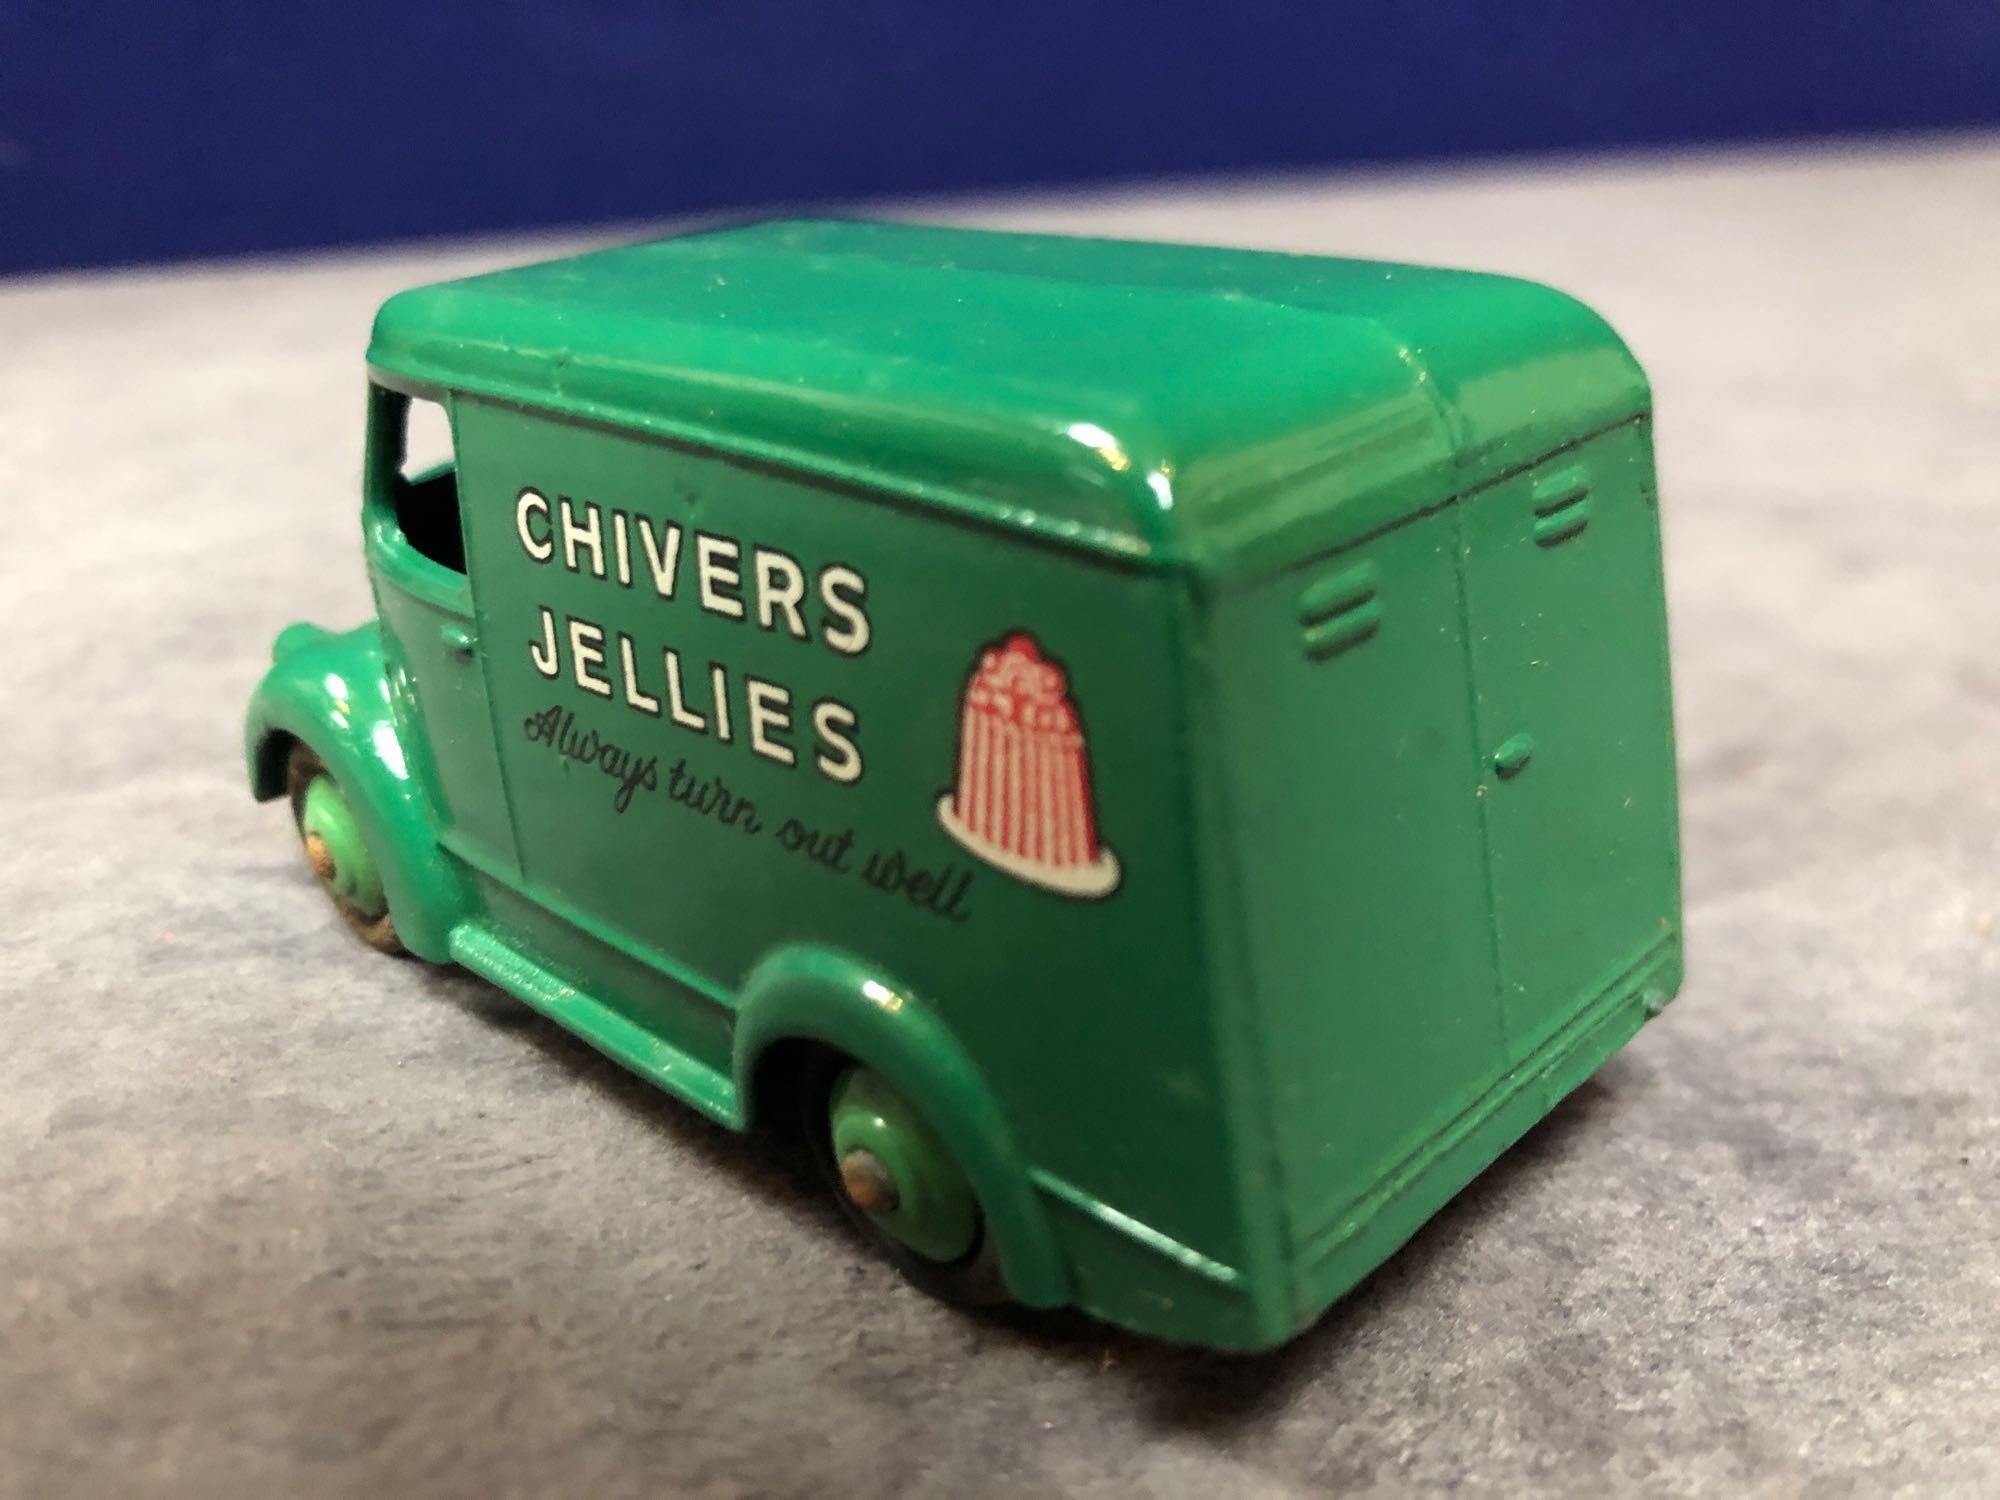 Dinky #452 Trojan 15cwt Van (Chivers) Green Model Is Mint Has A Slight Mark On Roof In A Solid - Image 3 of 4